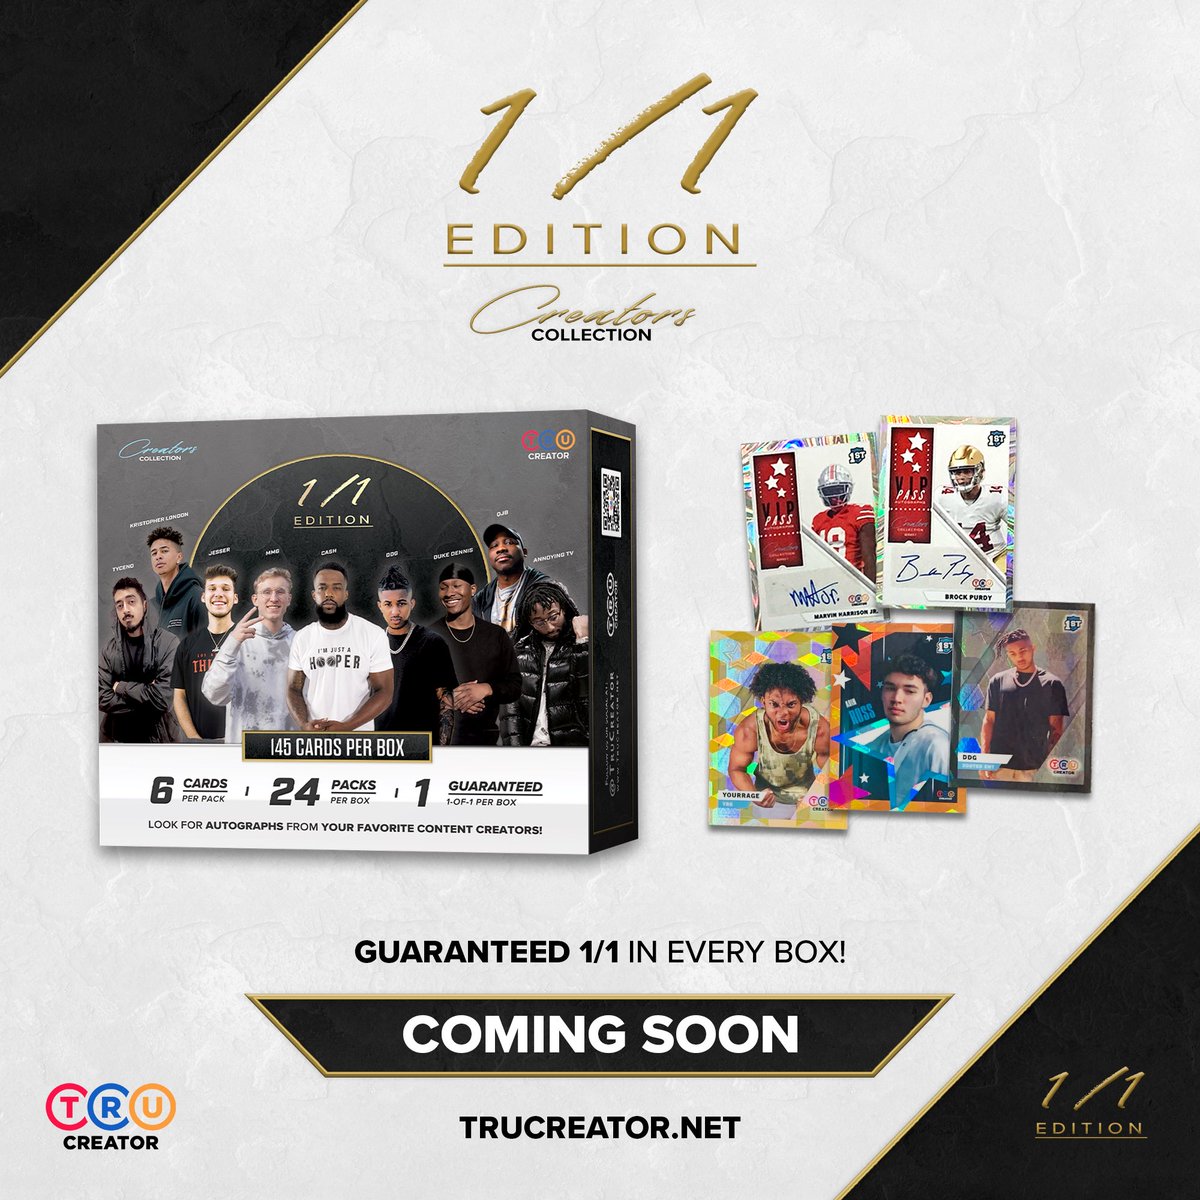 Creators Collection 1/1 Edition is almost here 🔥 Now featuring top athletes in addition to your favorite Series 1 creators, with 24 total packs and a guaranteed 1/1! Get your sleeves ready - boxes go live this Wednesday, Aug 2nd ✅ #TruCreator